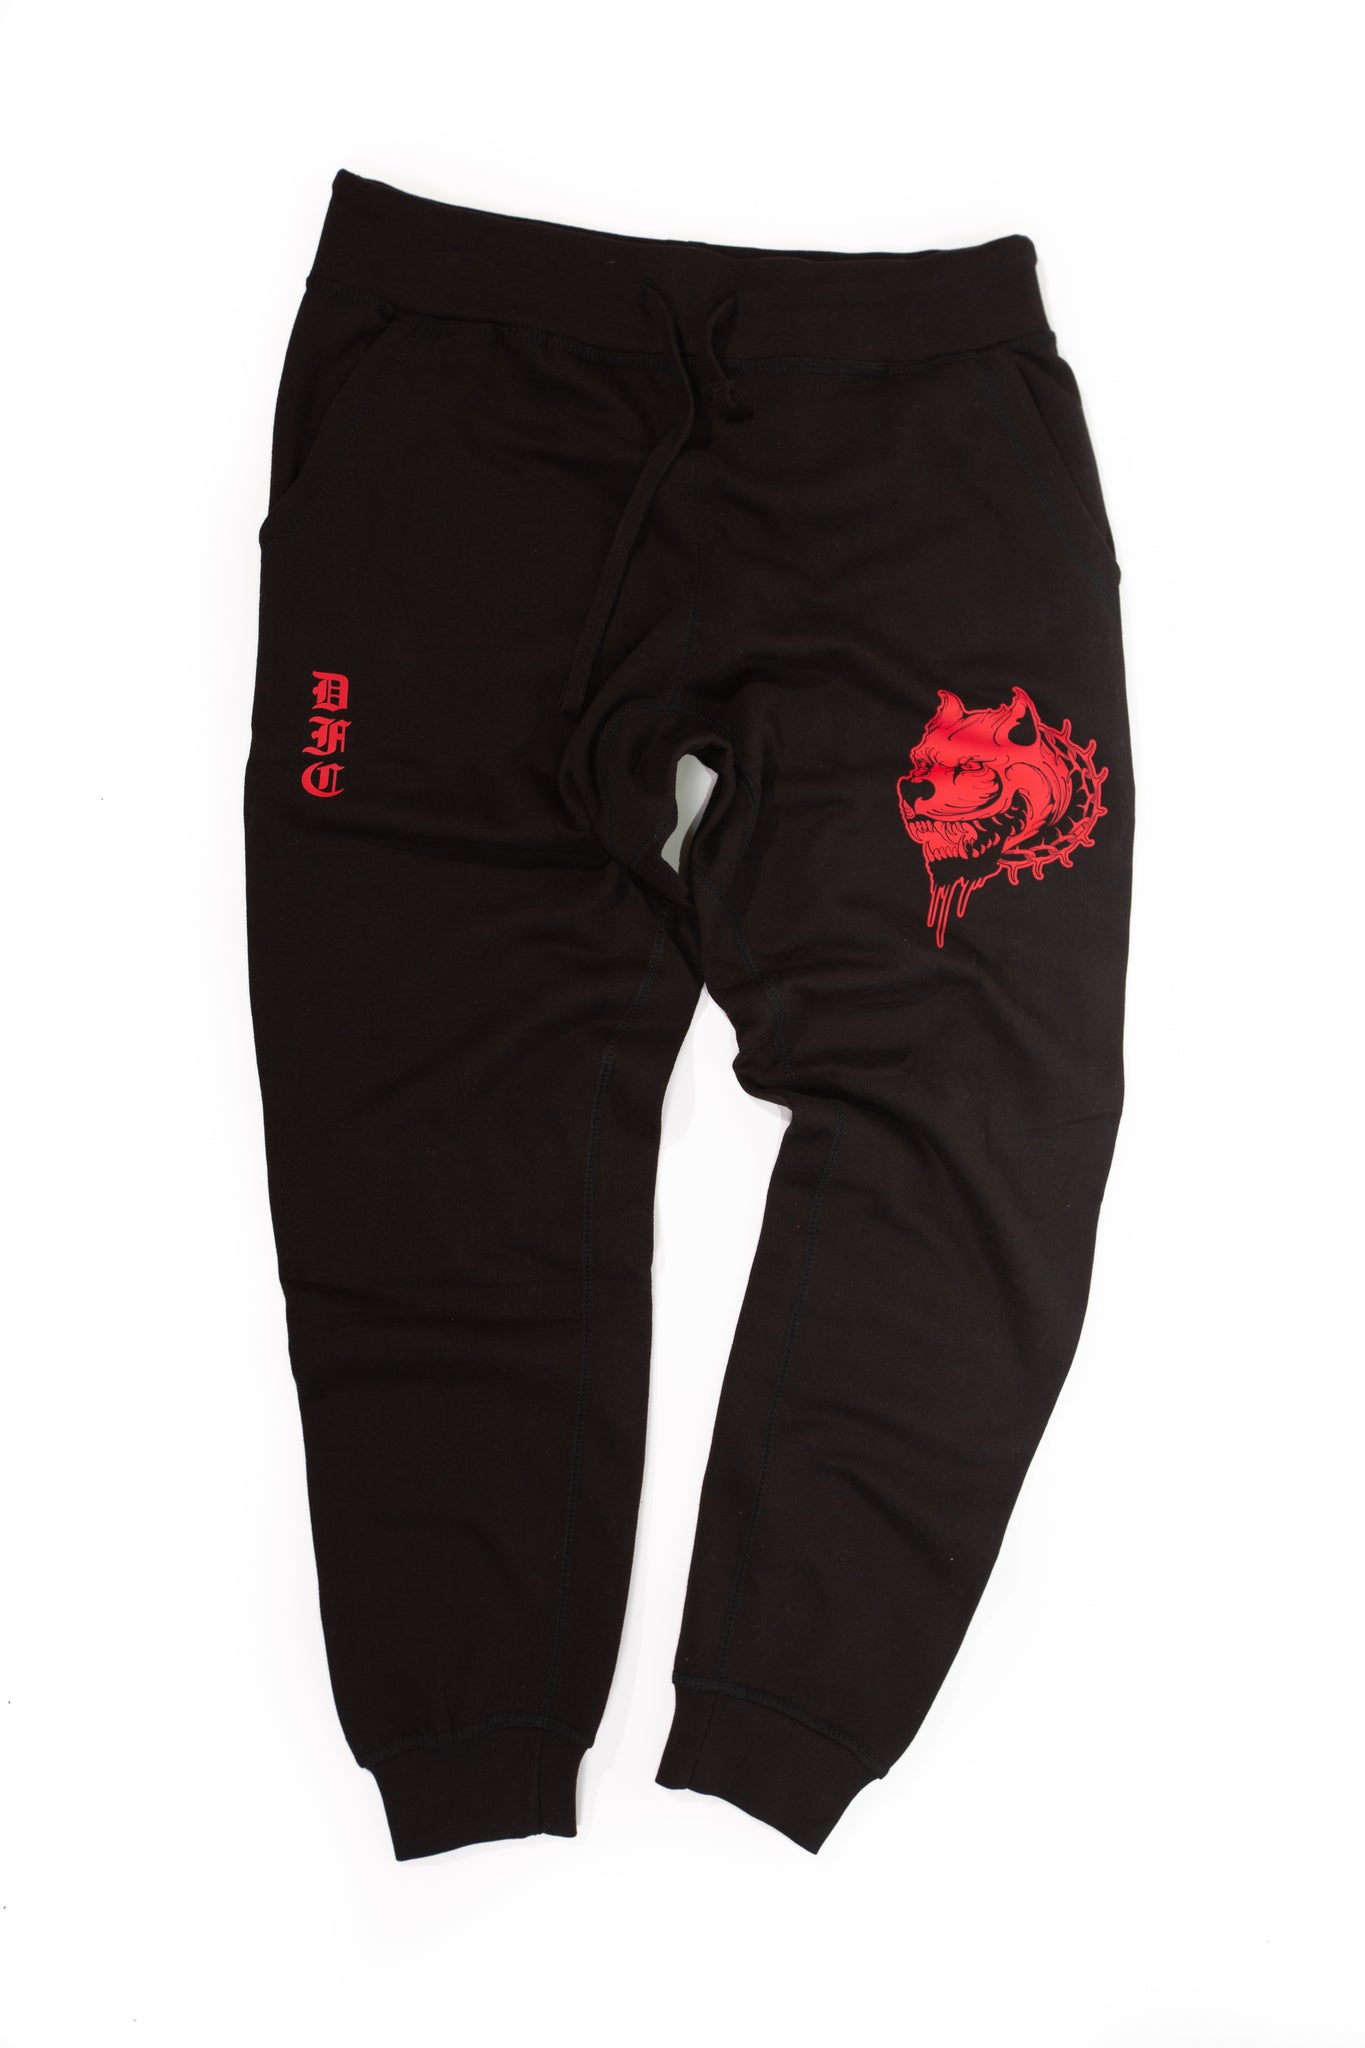 Black and Red Sweats XL